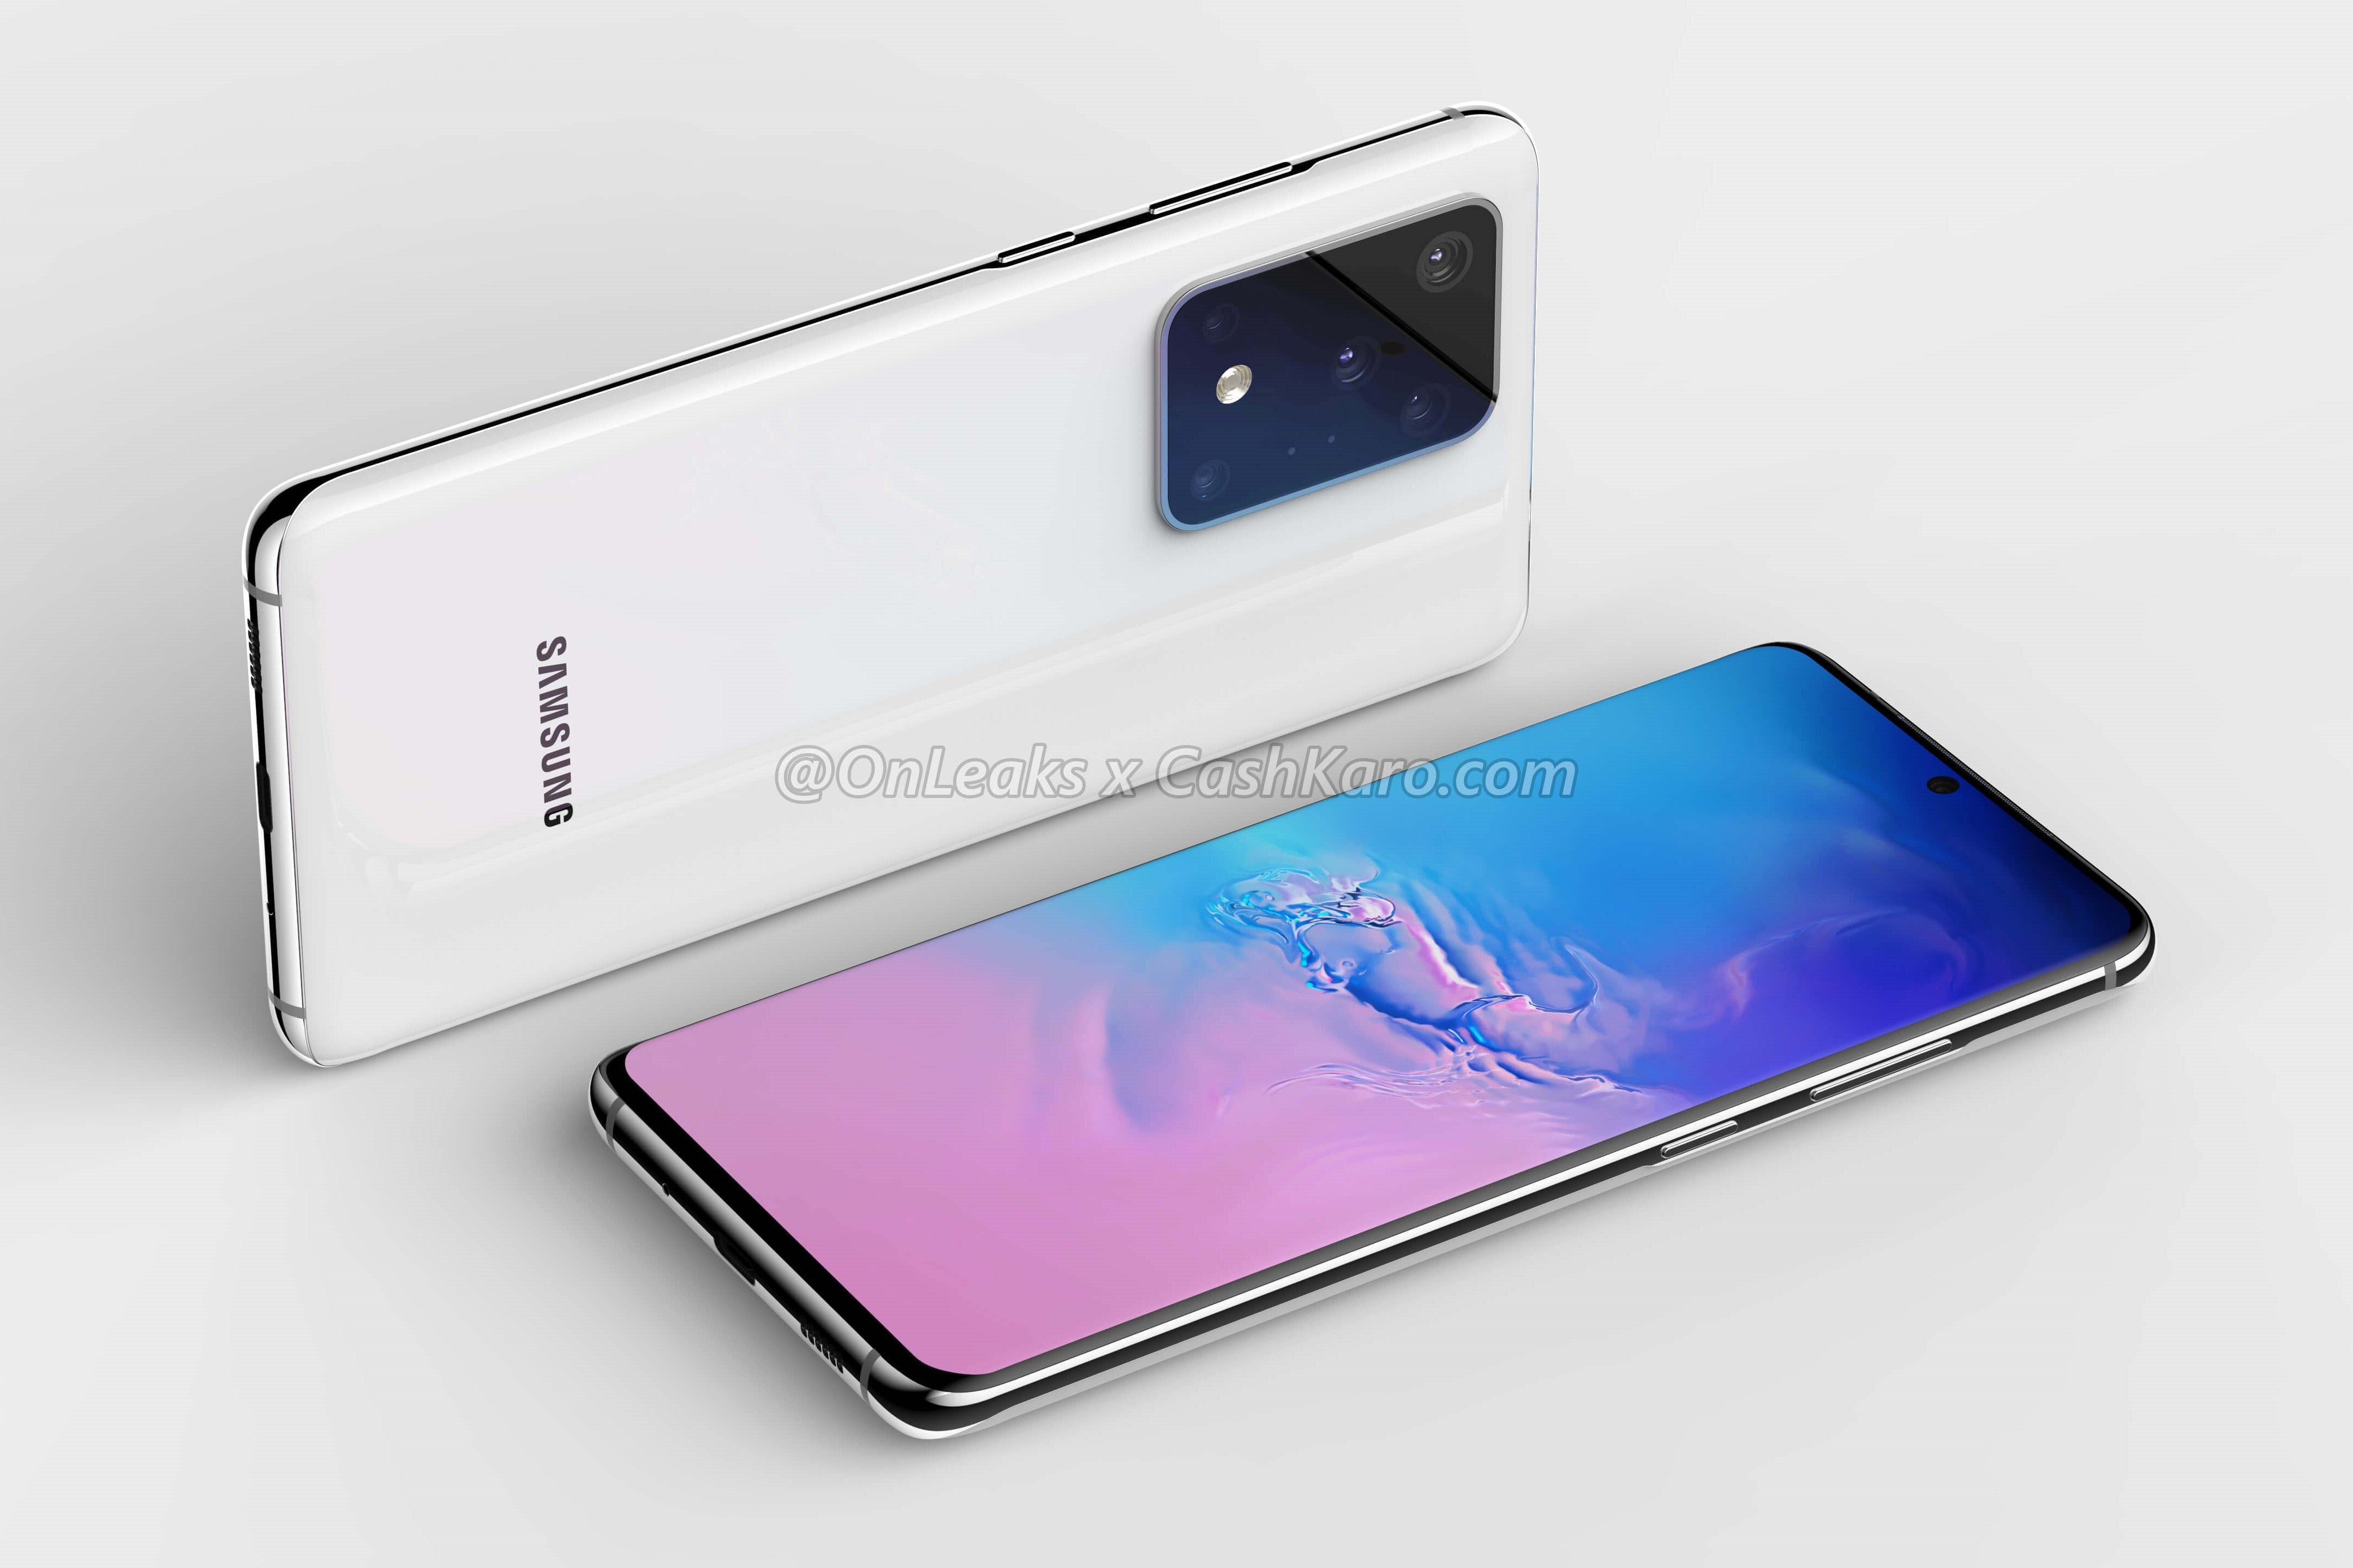 The Samsung Galaxy S20+ - The Galaxy S11 might not be Samsung's next flagship